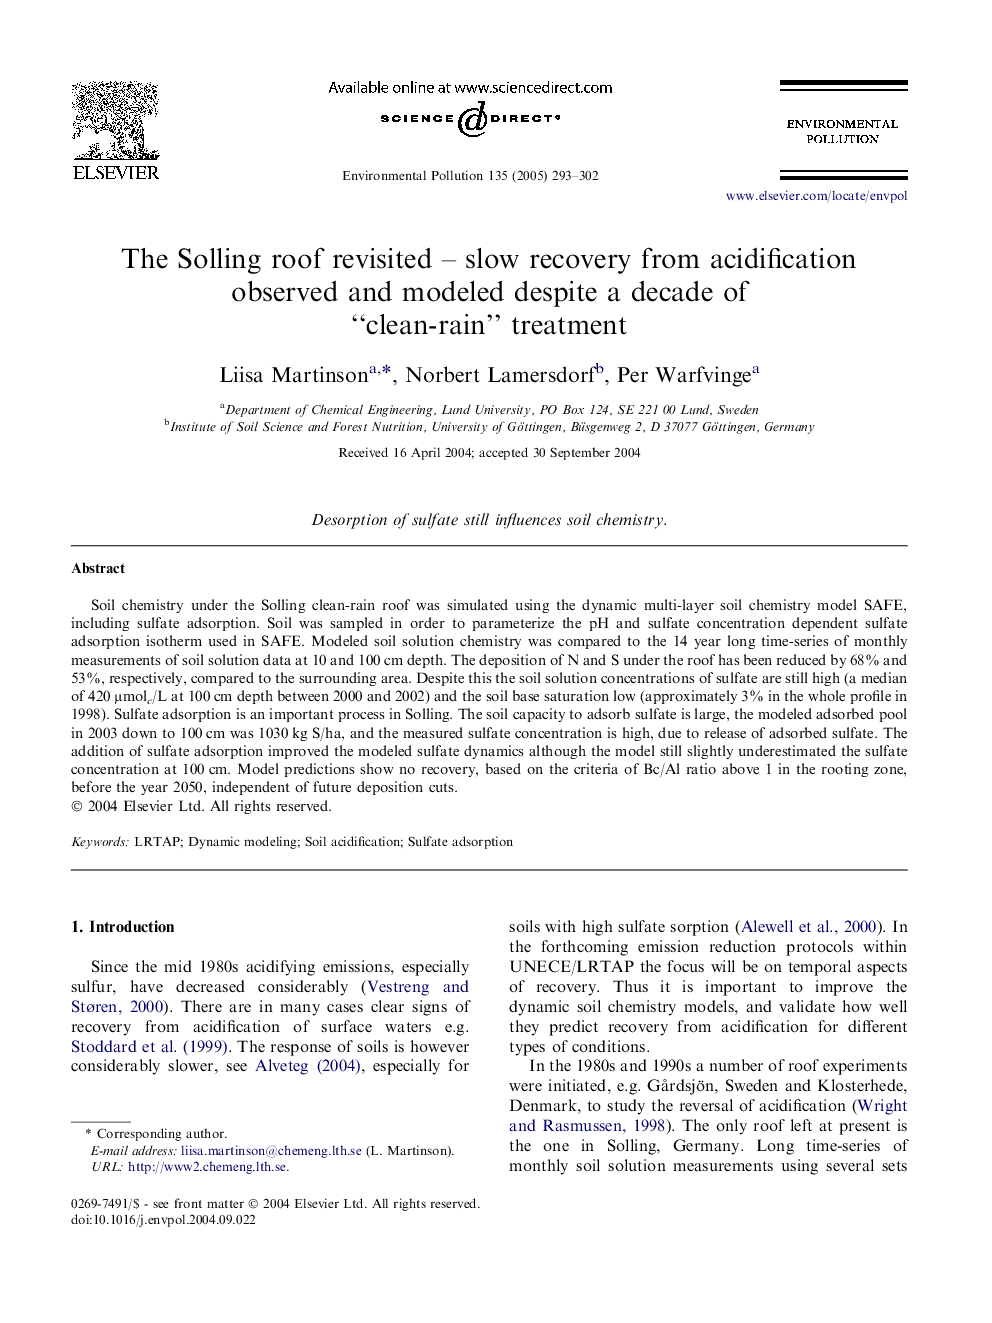 The Solling roof revisited - slow recovery from acidification observed and modeled despite a decade of “clean-rain” treatment